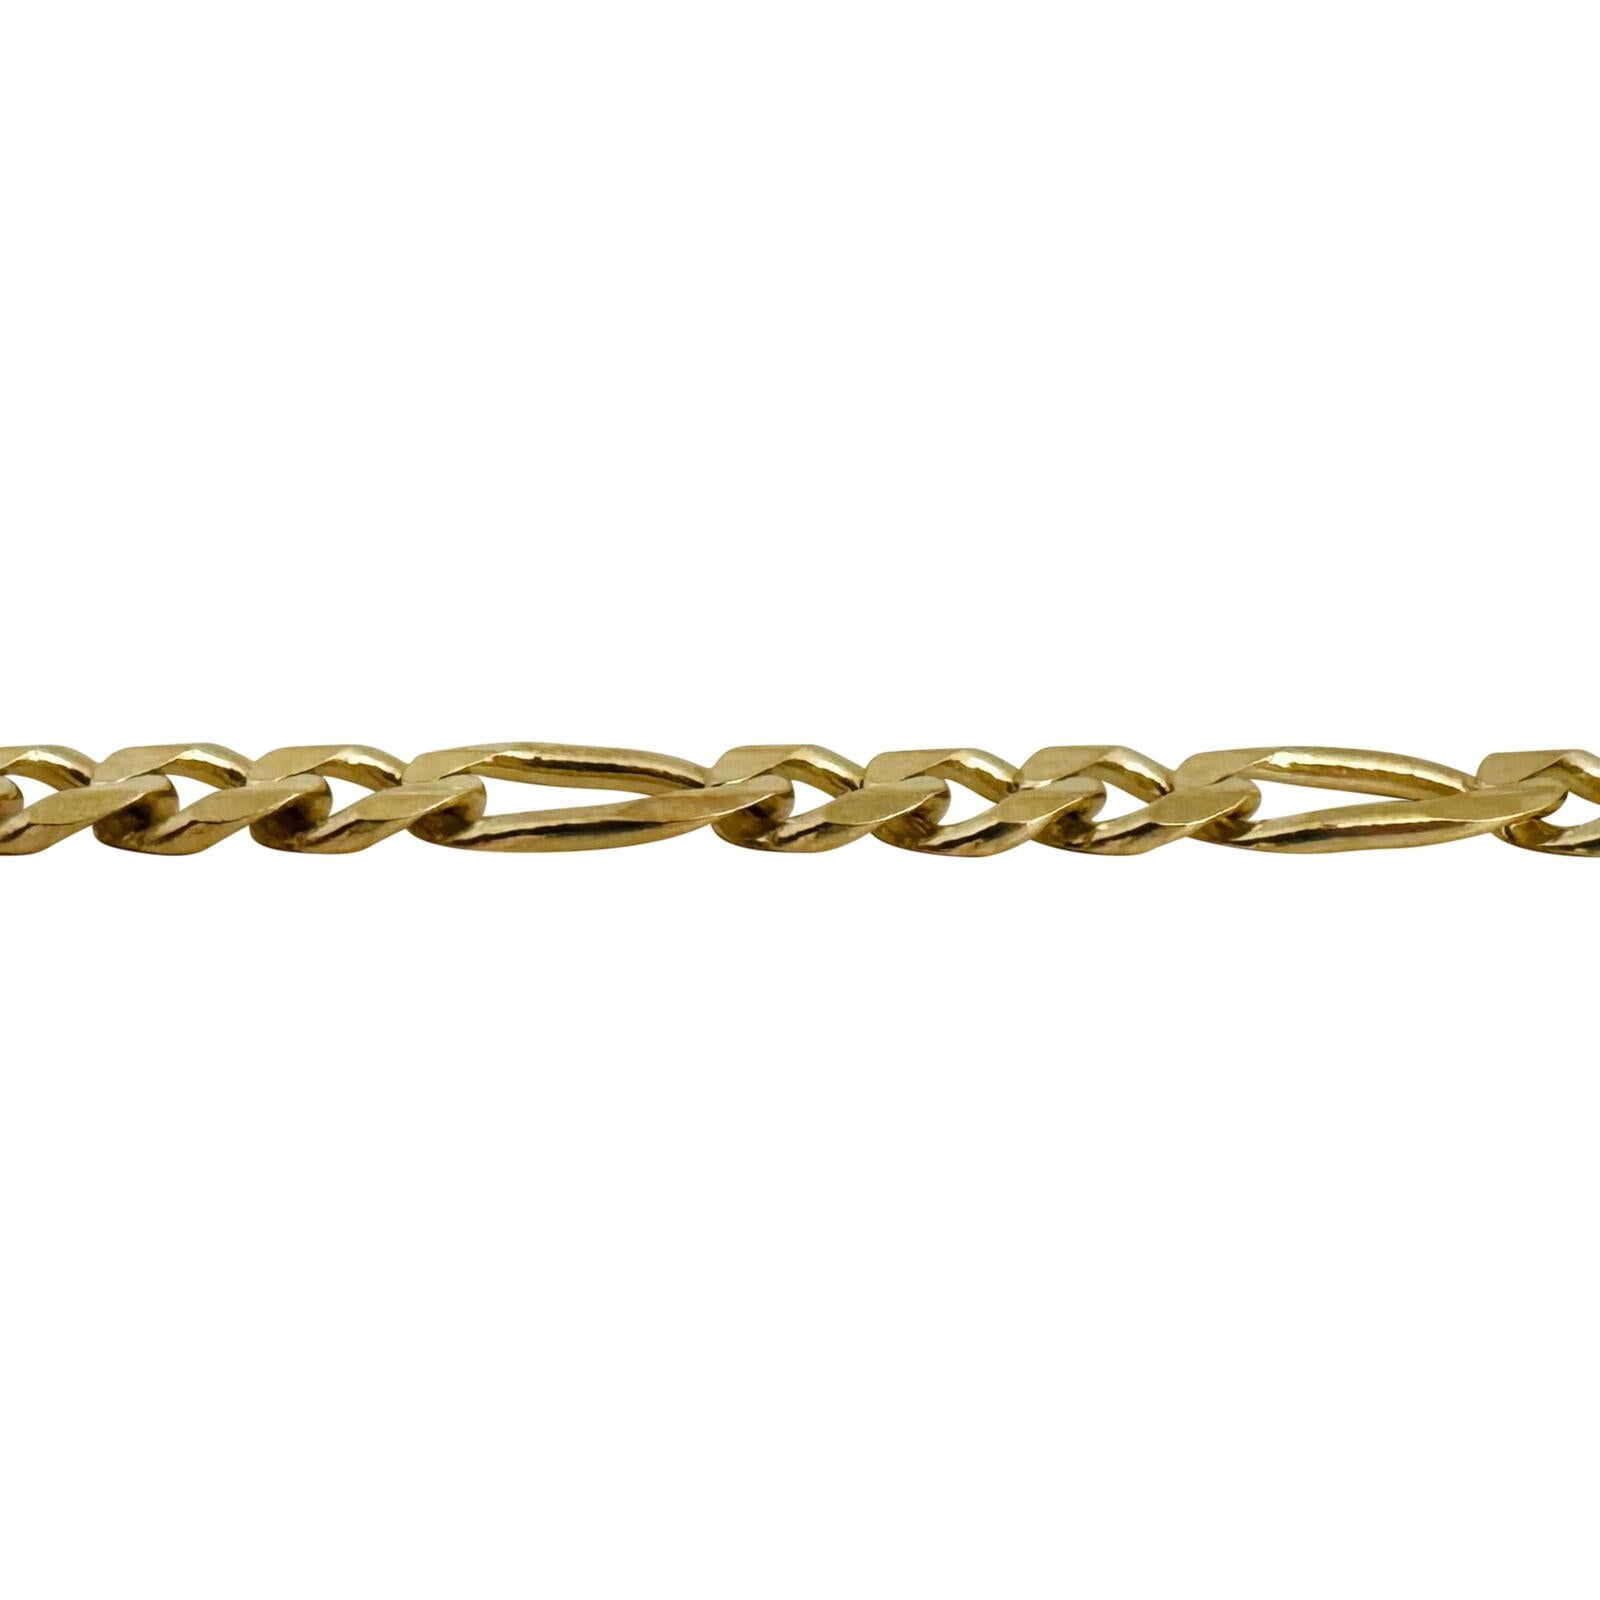  14 Karat Yellow Gold Solid Men's Figaro Link Chain Necklace Italy  Pour hommes 